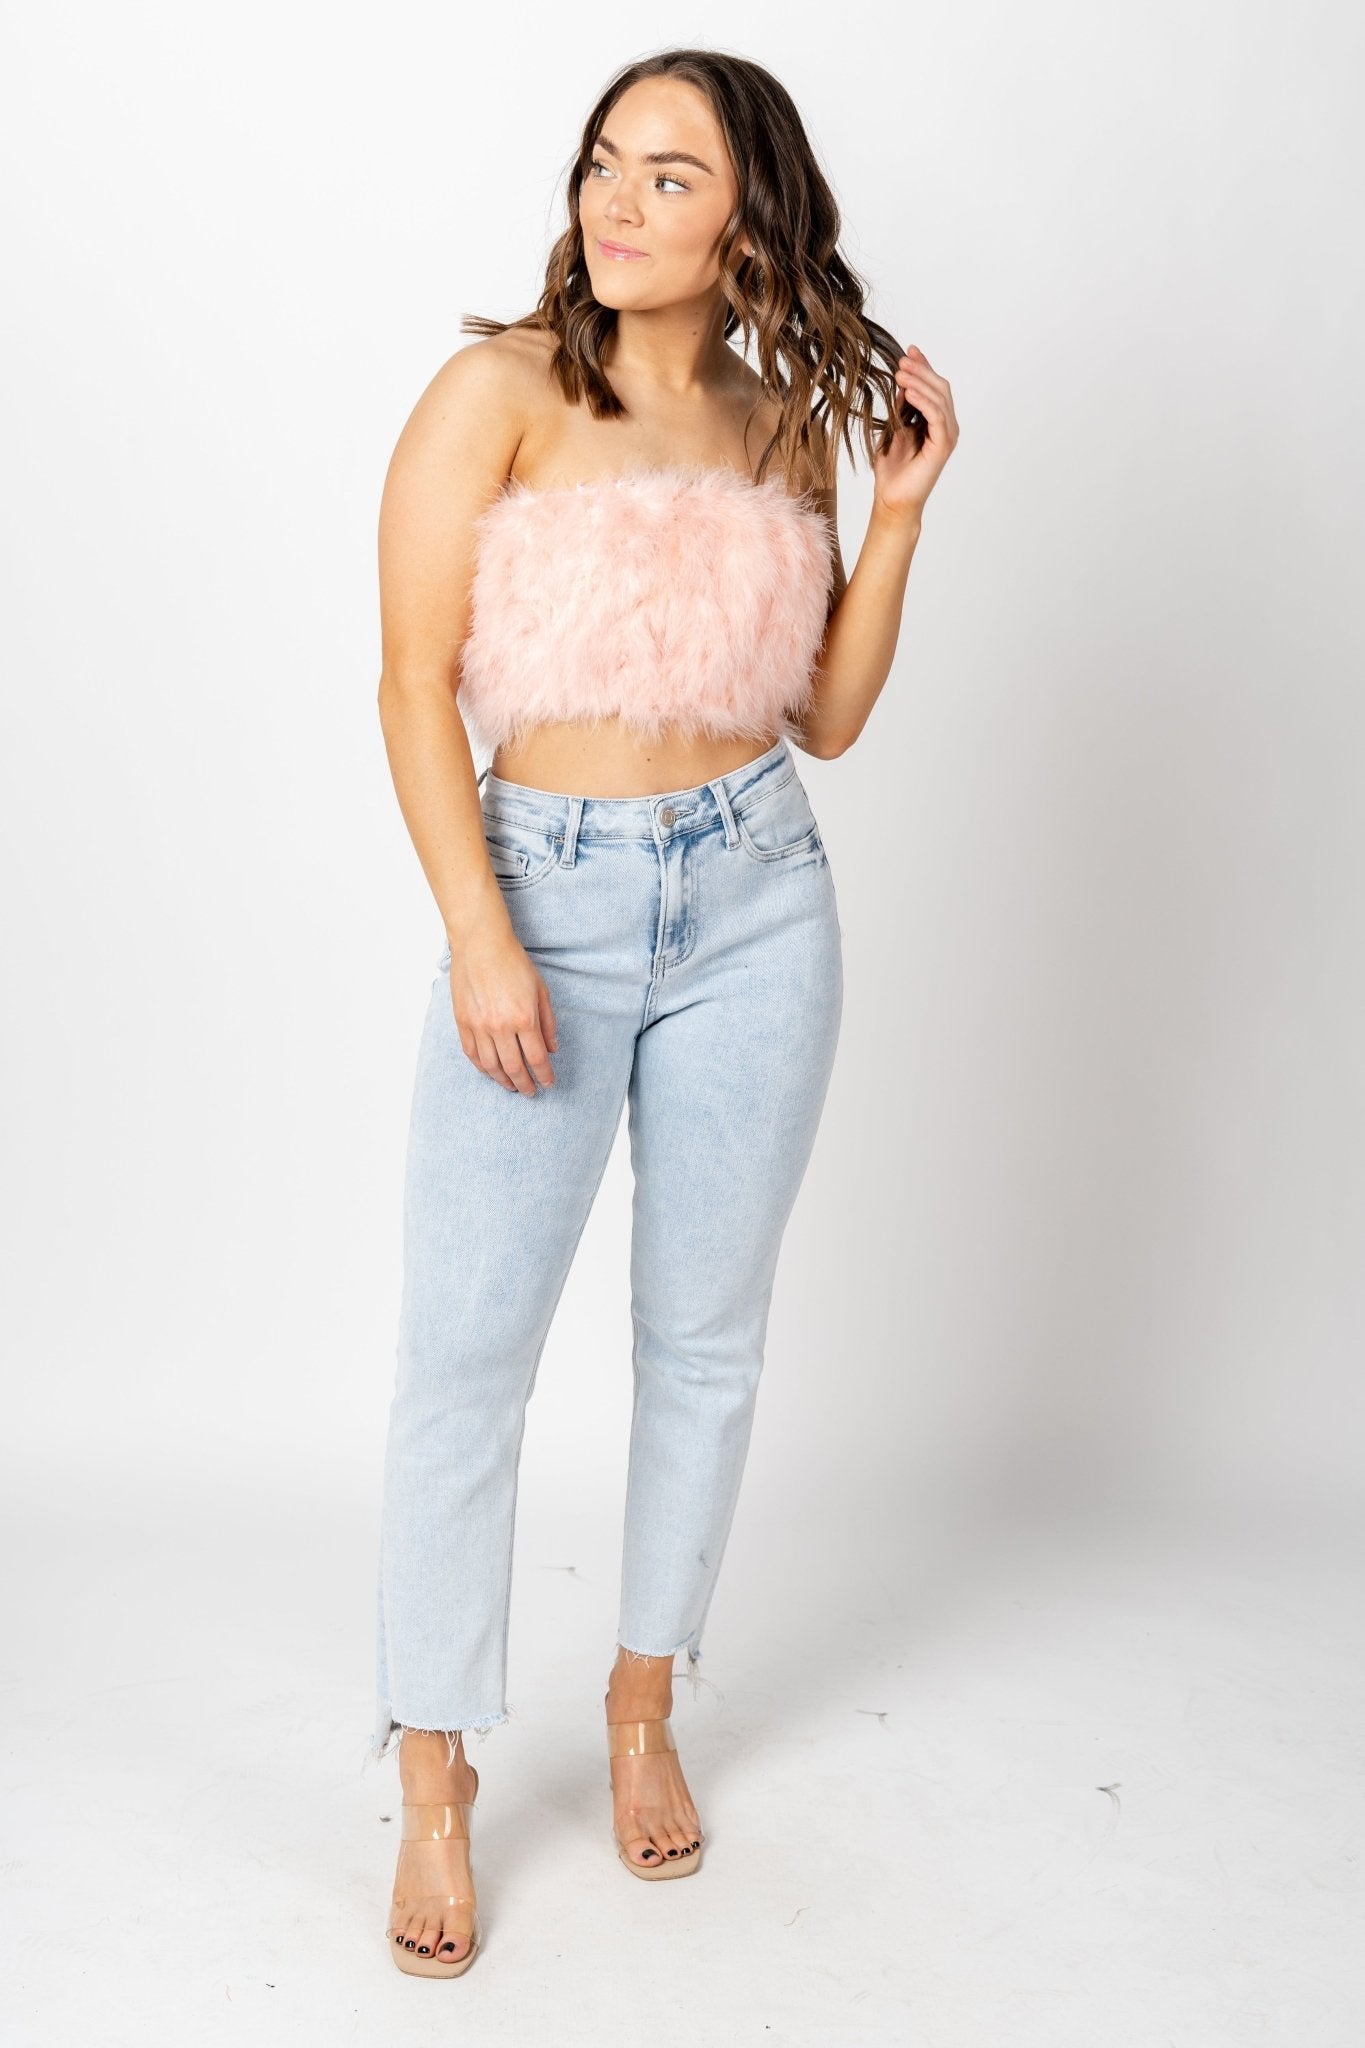 Feather crop top pink